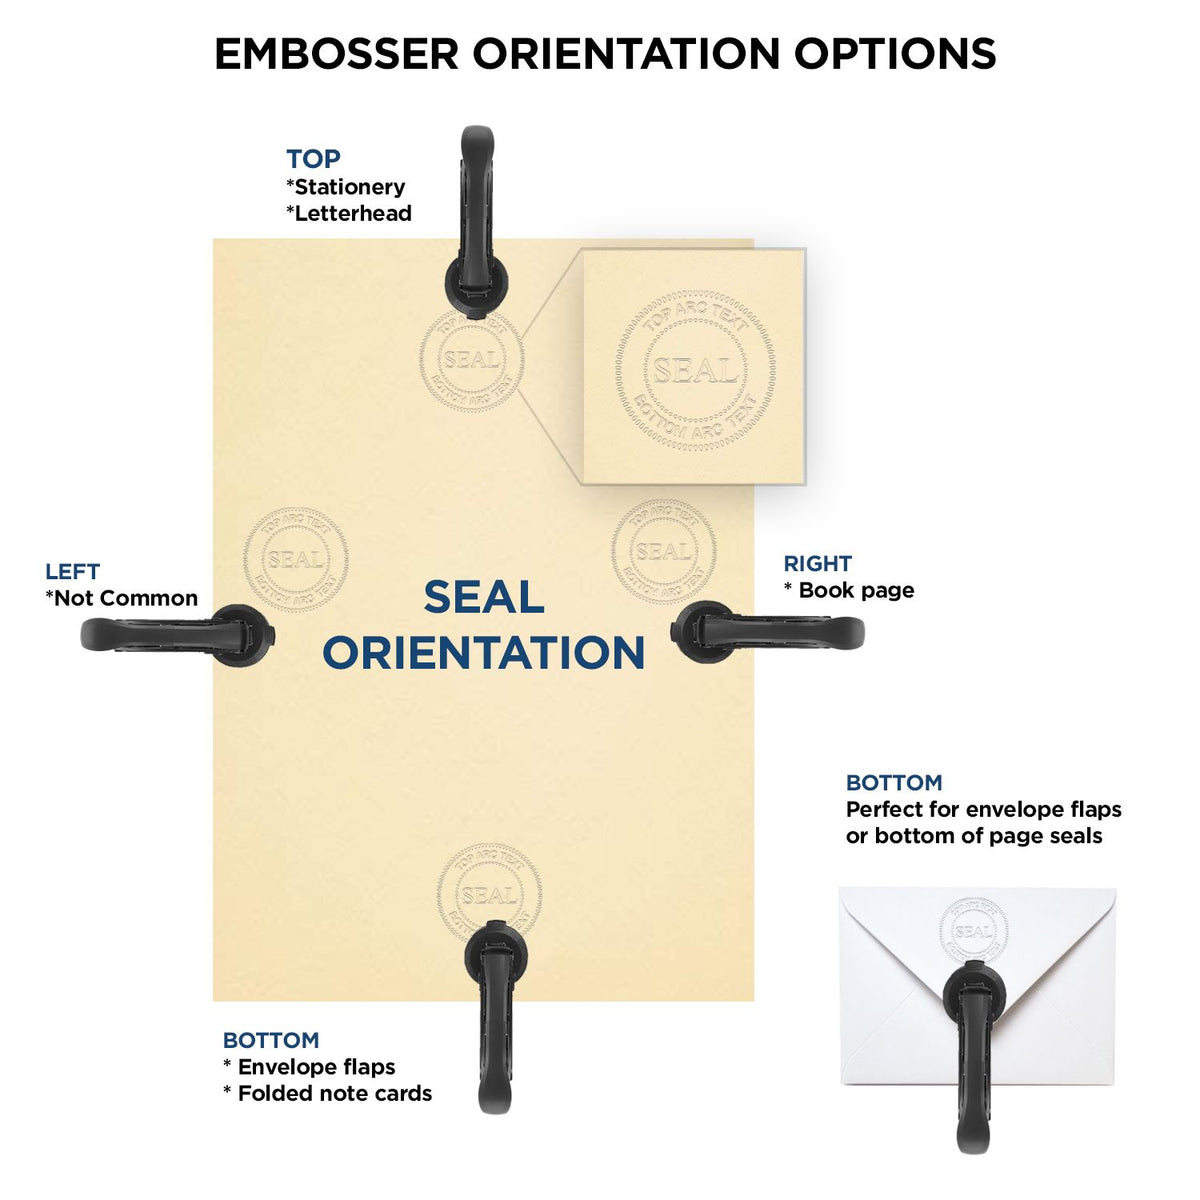 An infographic for the State of Louisiana Long Reach Architectural Embossing Seal showing embosser orientation, this is showing examples of a top, bottom, right and left insert.